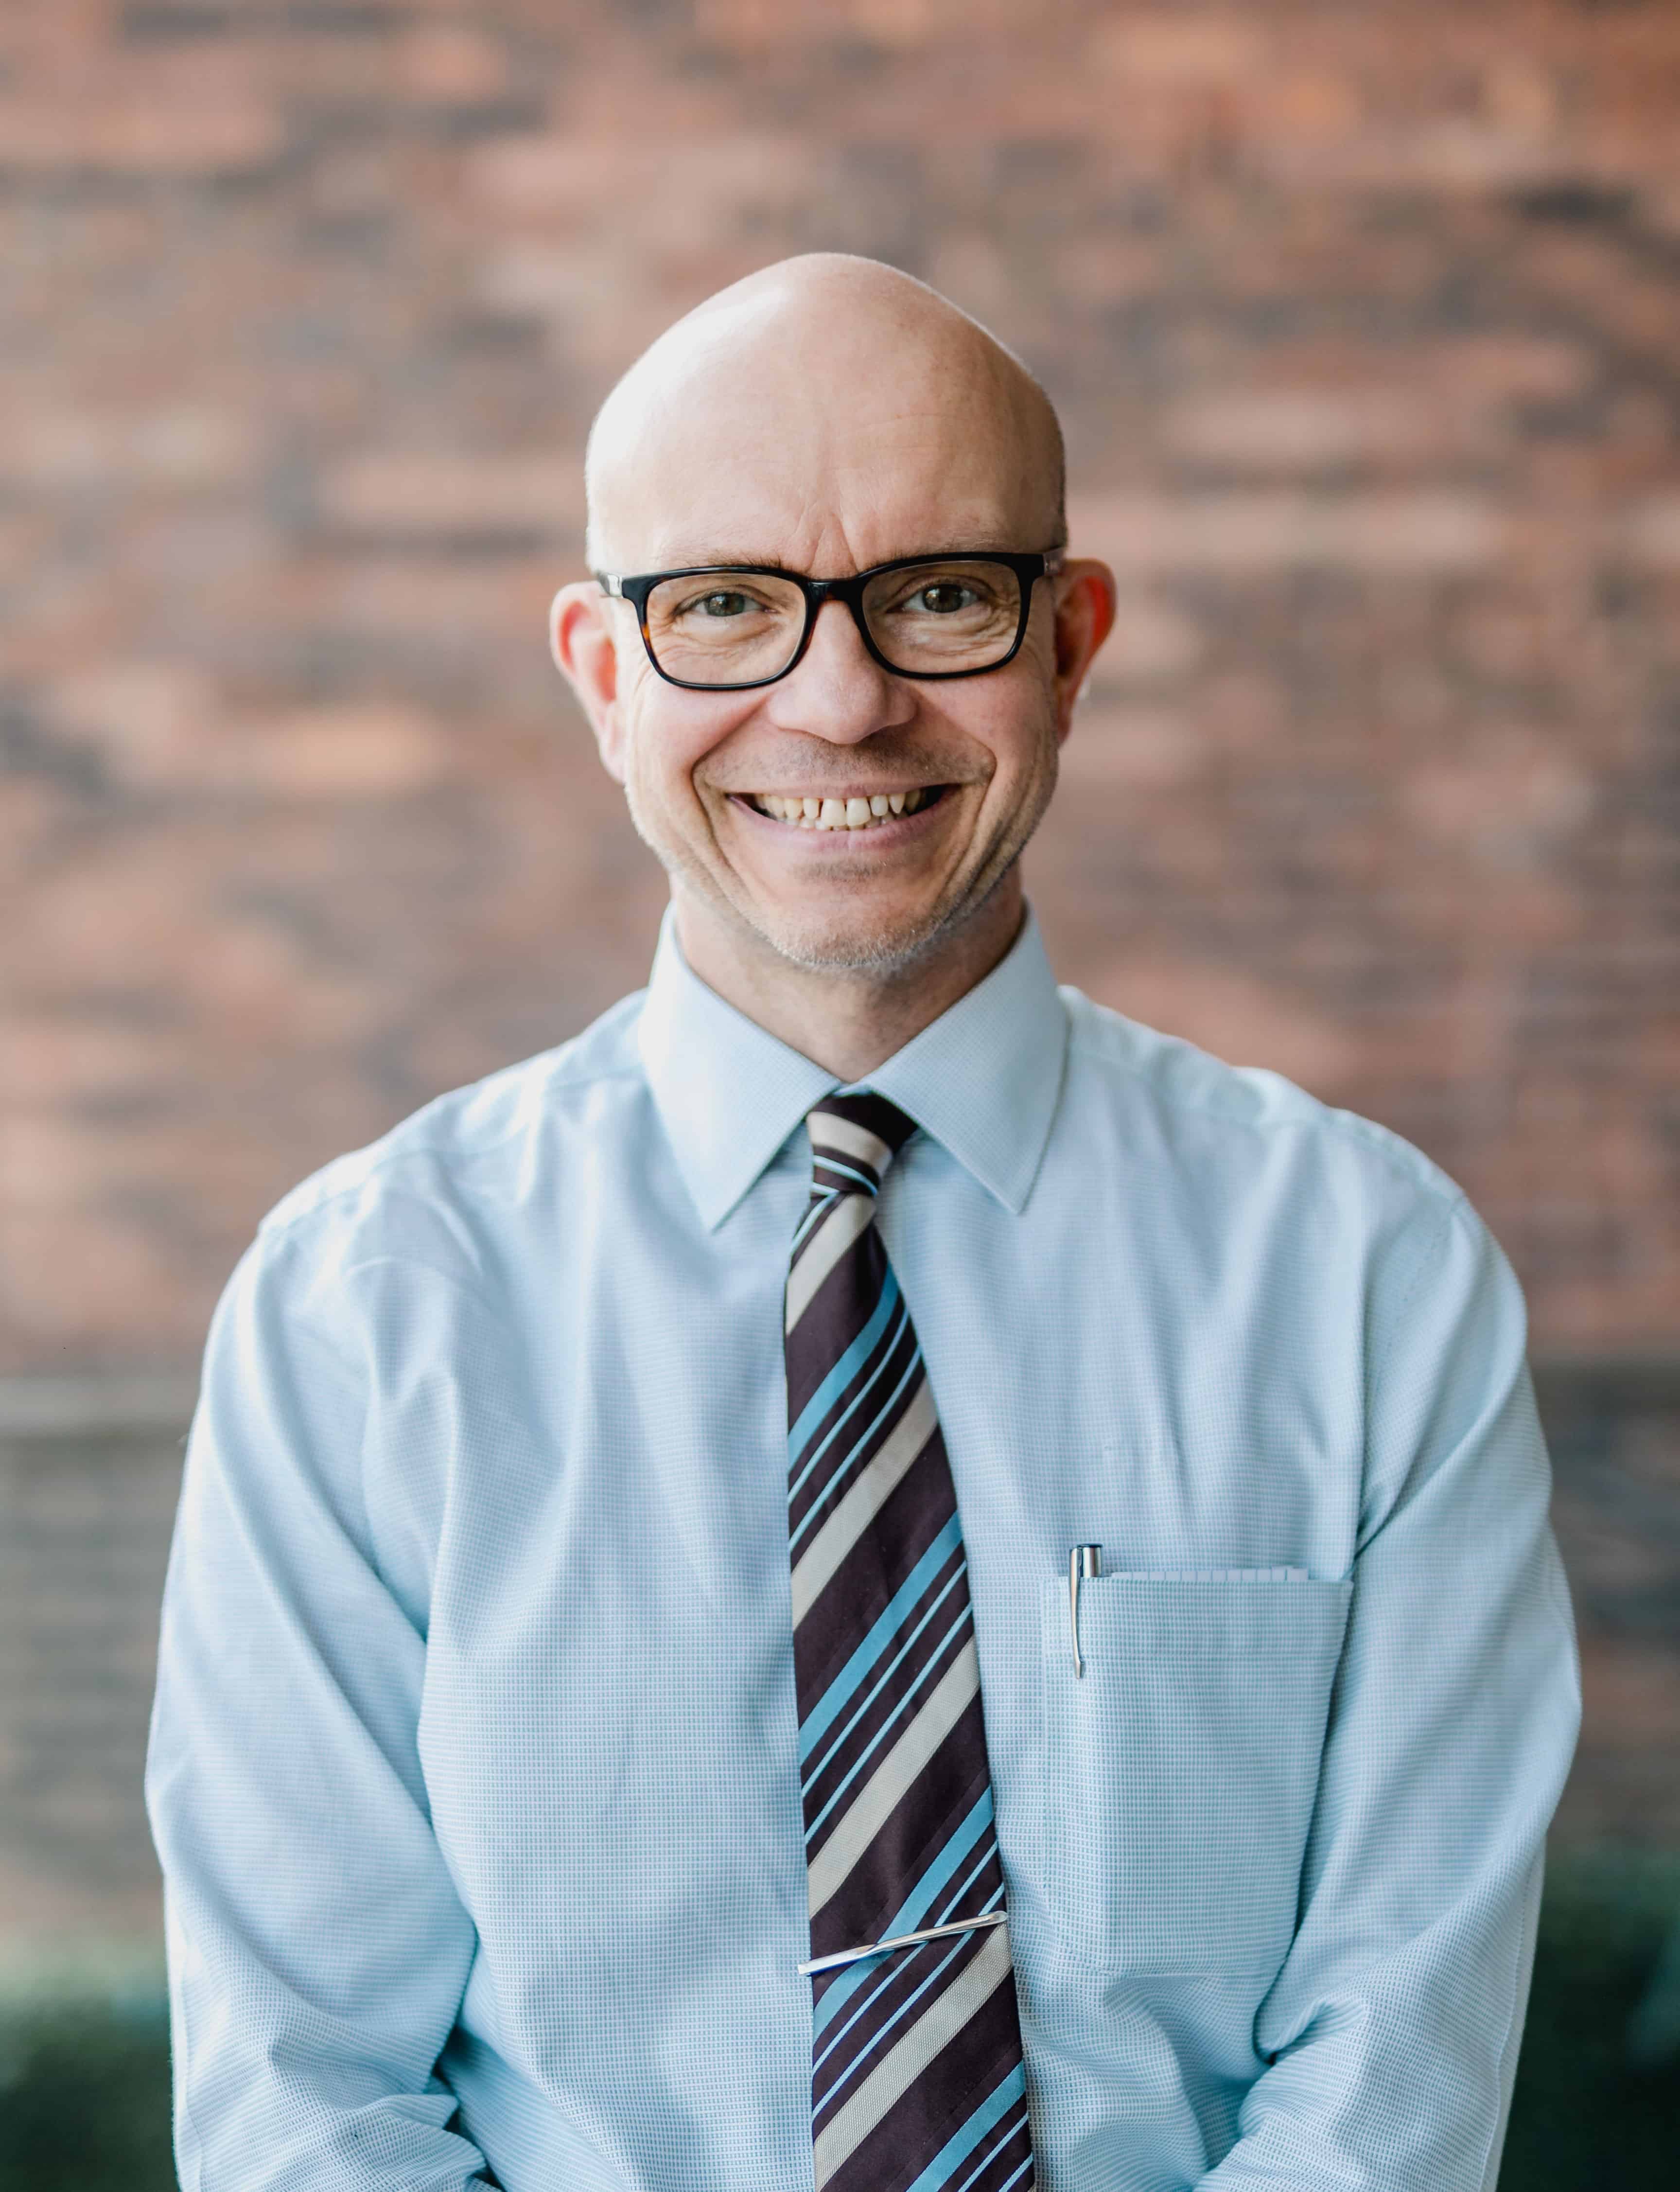 Image of Dr Dan Cottingham who is the GP Lead for Cancer at Humber, Coast and Vale Cancer Alliance. The image shows Dan standing in front of a brick wall, wearing a shirt and tie. He is wearing glasses and is smiling.